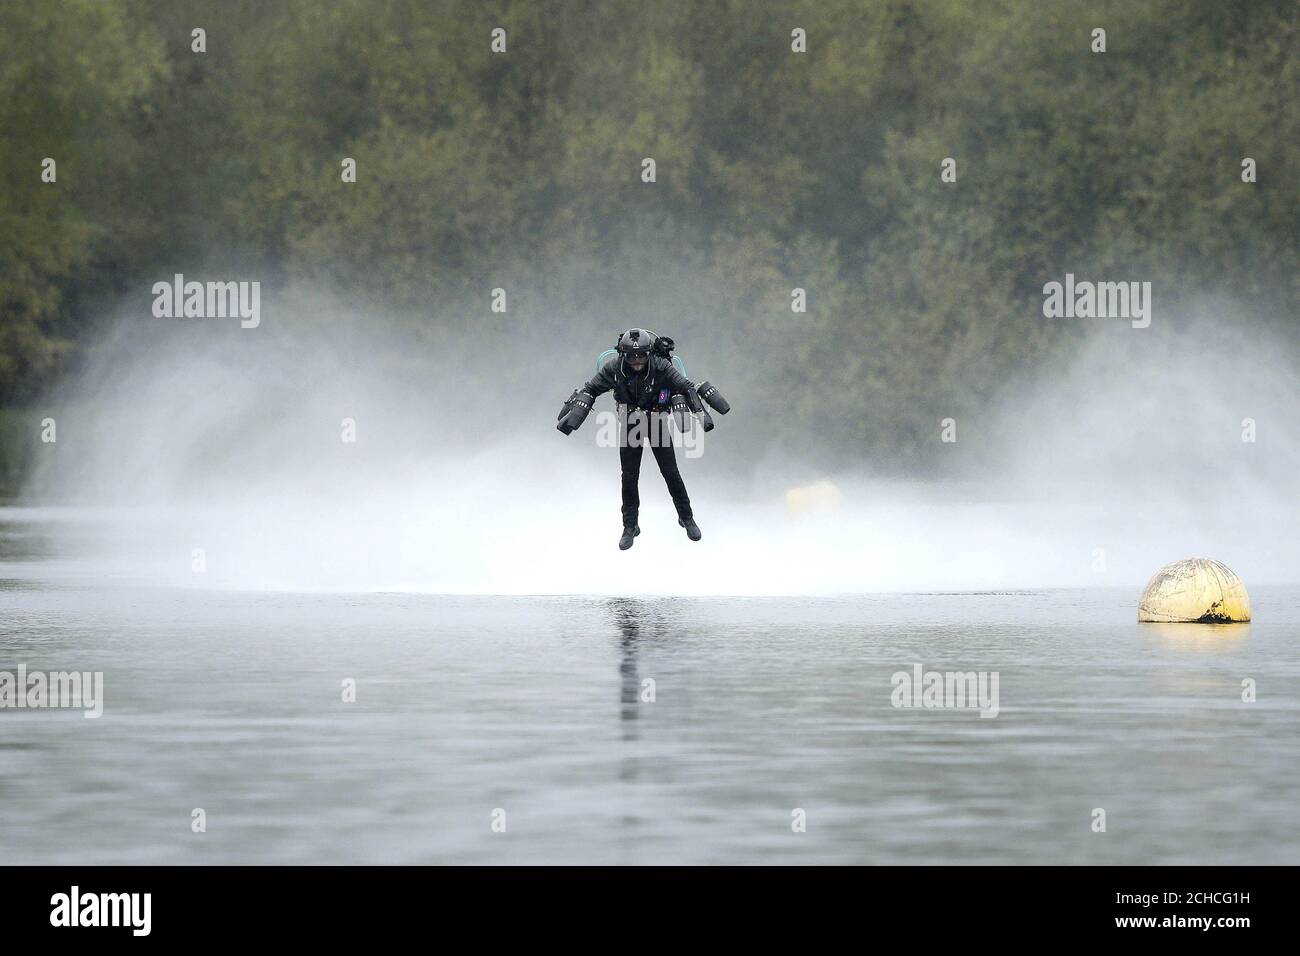 Richard Browning, founder and pilot at Gravity Industries Ltd, sets the Guinness World Record for 'the fastest speed in a body-controlled jet engine power suit', at Lagoona Park in Reading, in celebration of Guinness World Records Day 2017 Stock Photo